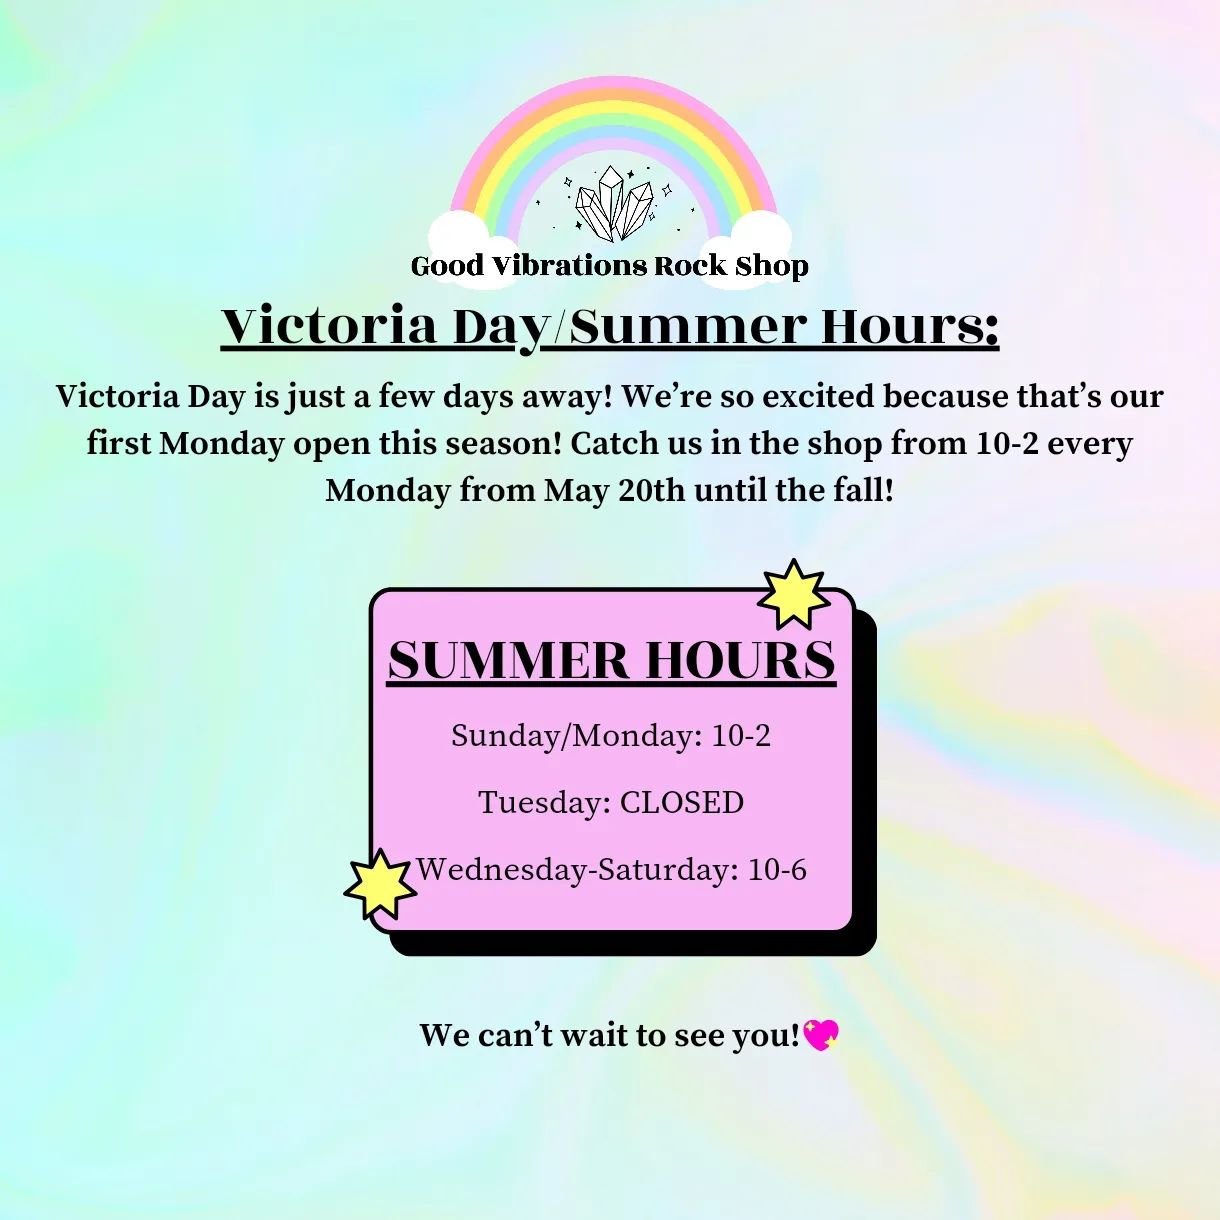 ☀️SUMMER HOURS☀️

Summer is right around the corner and so are our official summer hours!

Starting next week - Mondays are back in the mix!🗓️

From now until the fall you can find us in the shop from 10-2 on Mondays!&nbsp;

We&rsquo;re so excited f